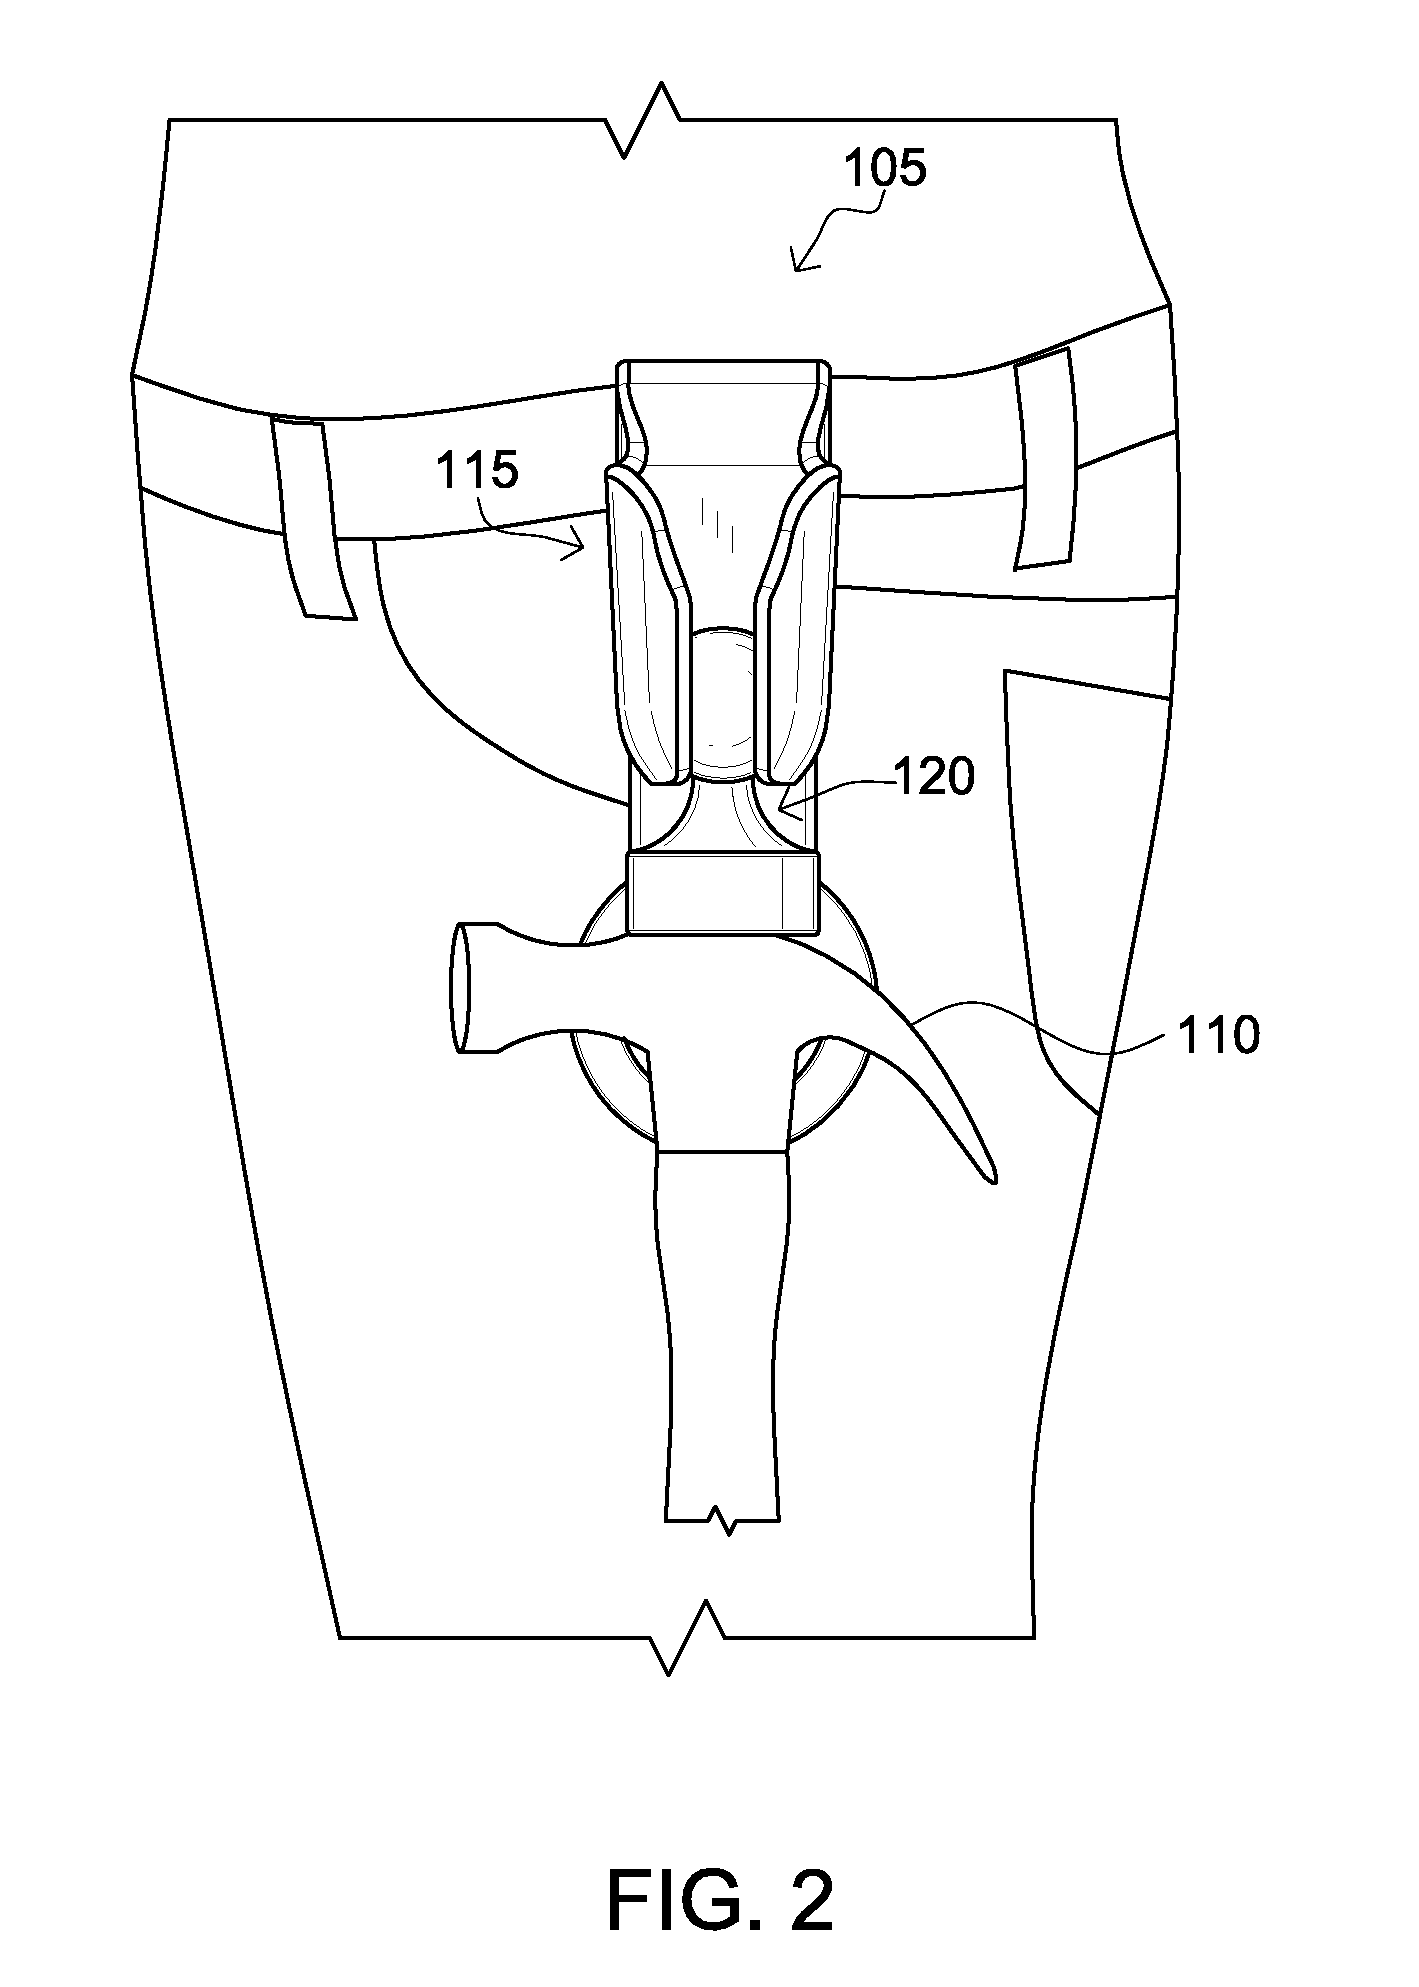 Tool securing device and methods related thereto